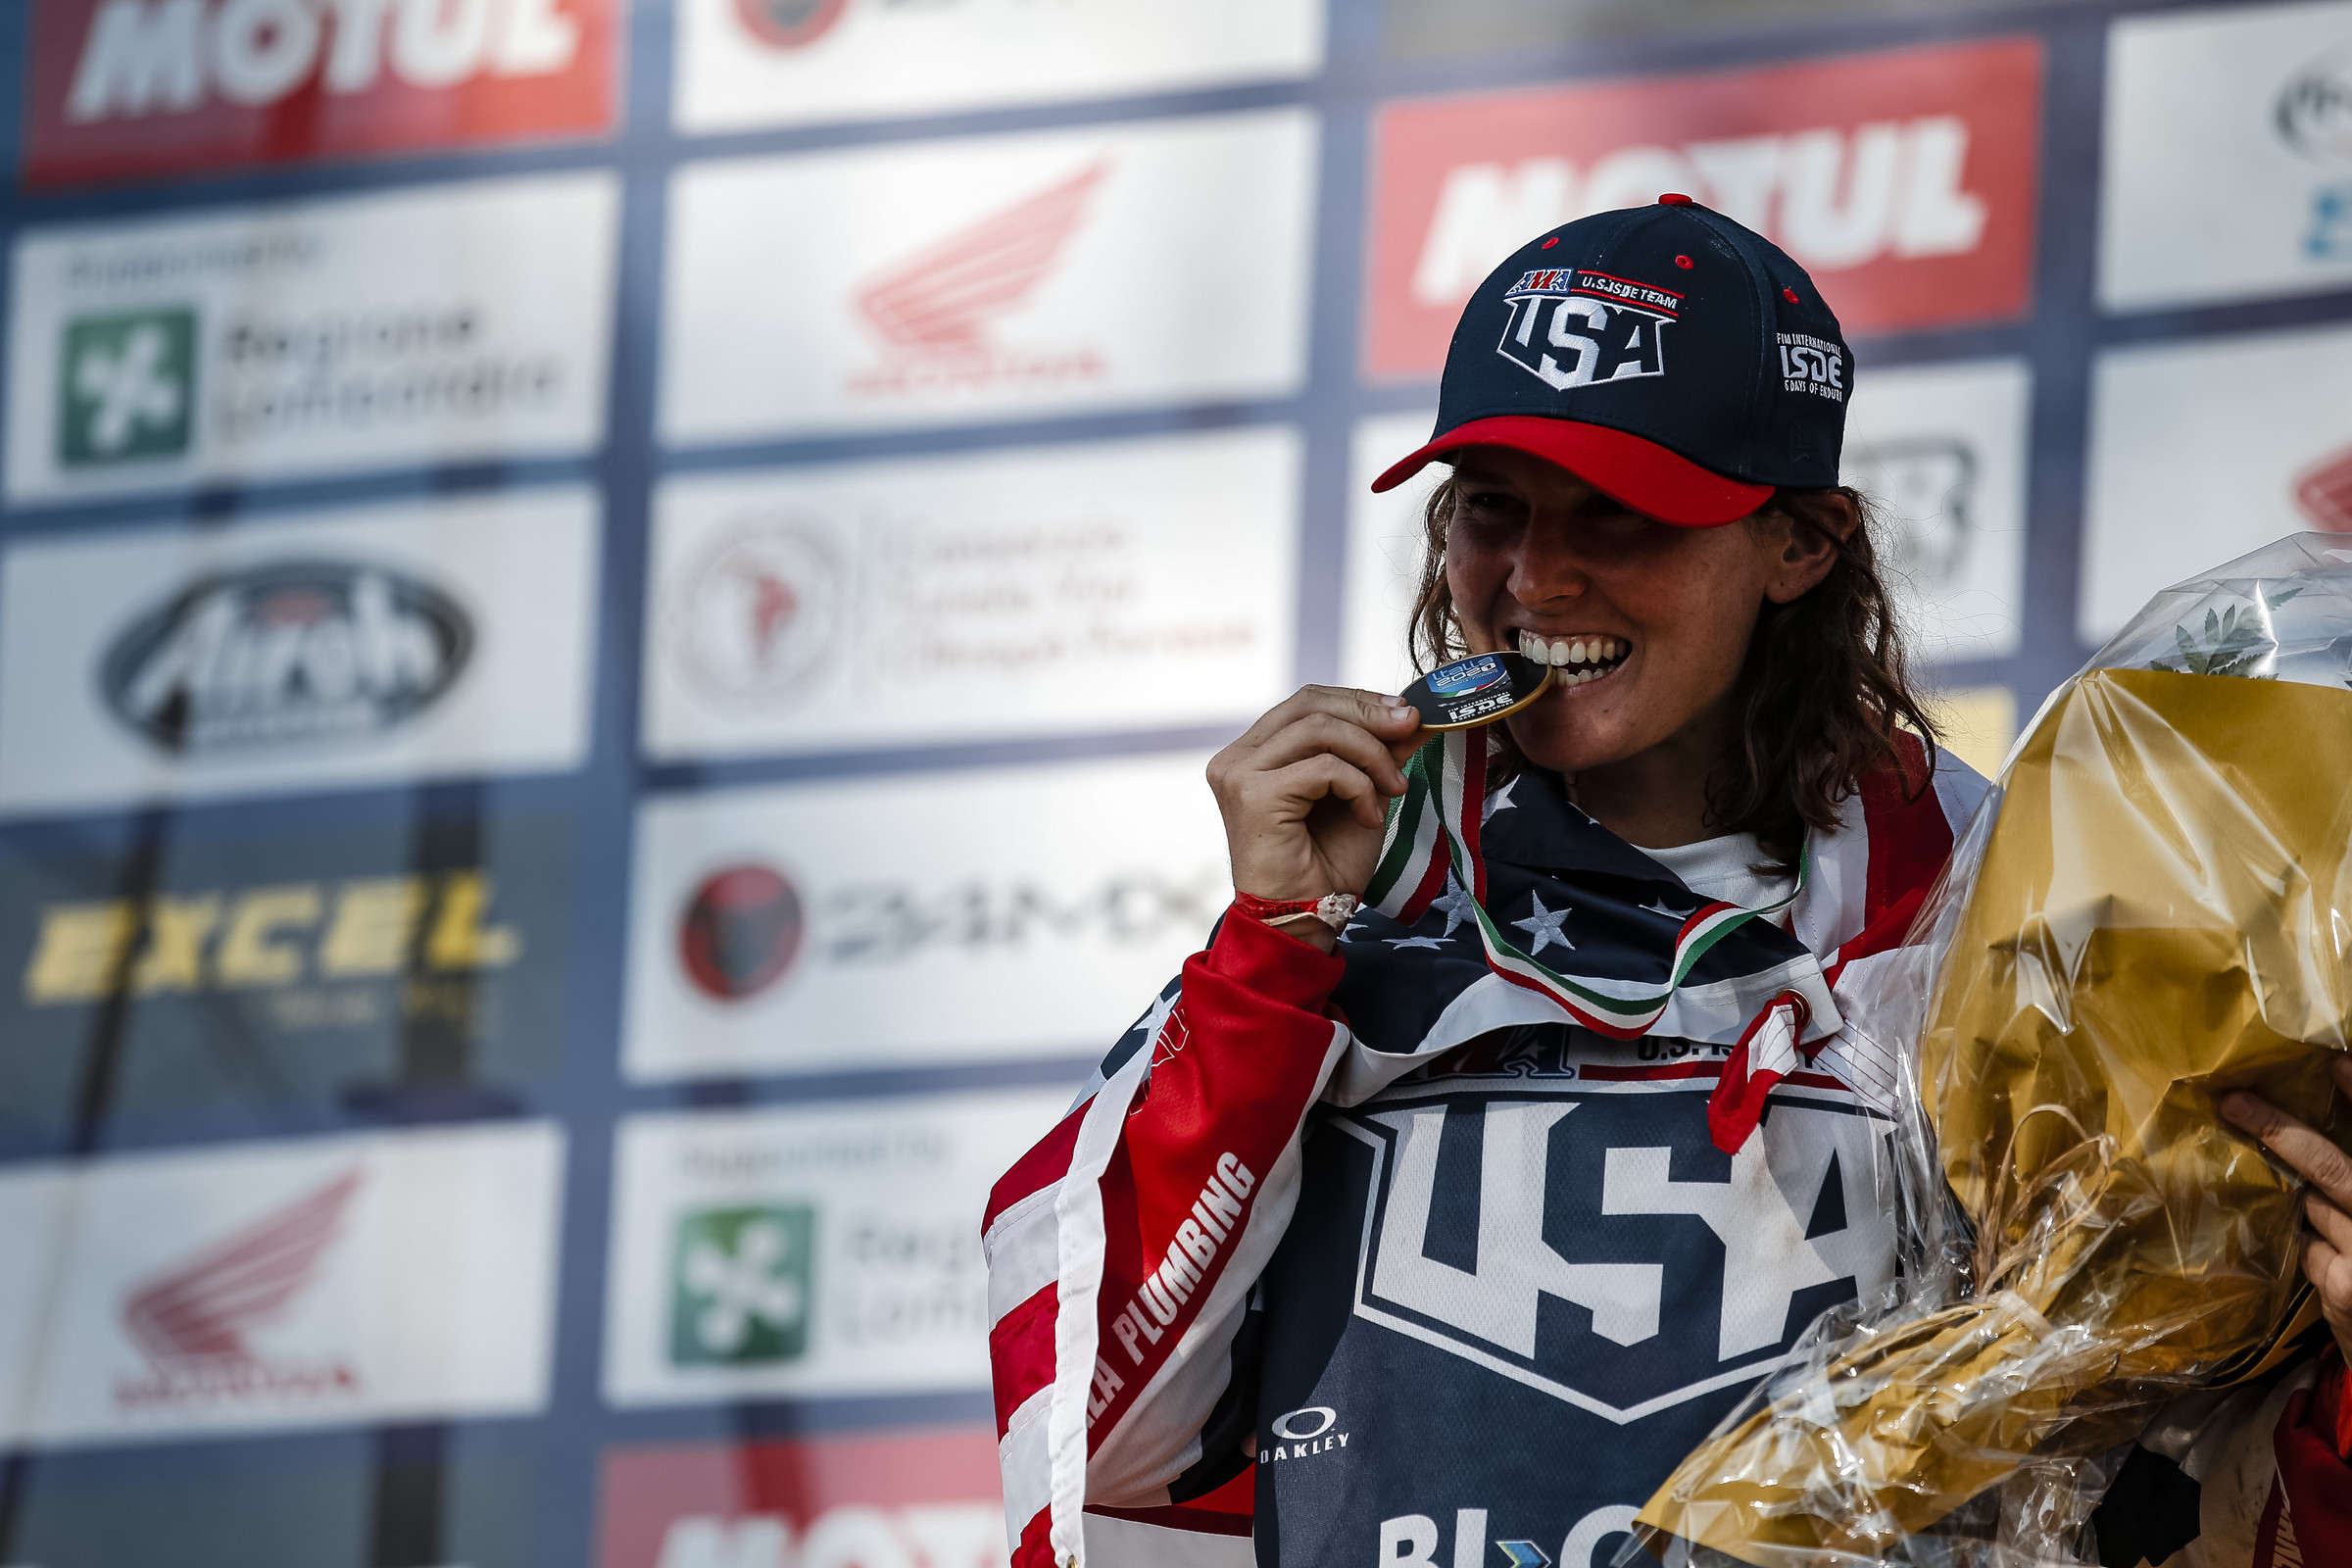 Italy (World Trophy) and USA (Women's World Trophy) Crowned 2021 ISDE  Champions - Racer X